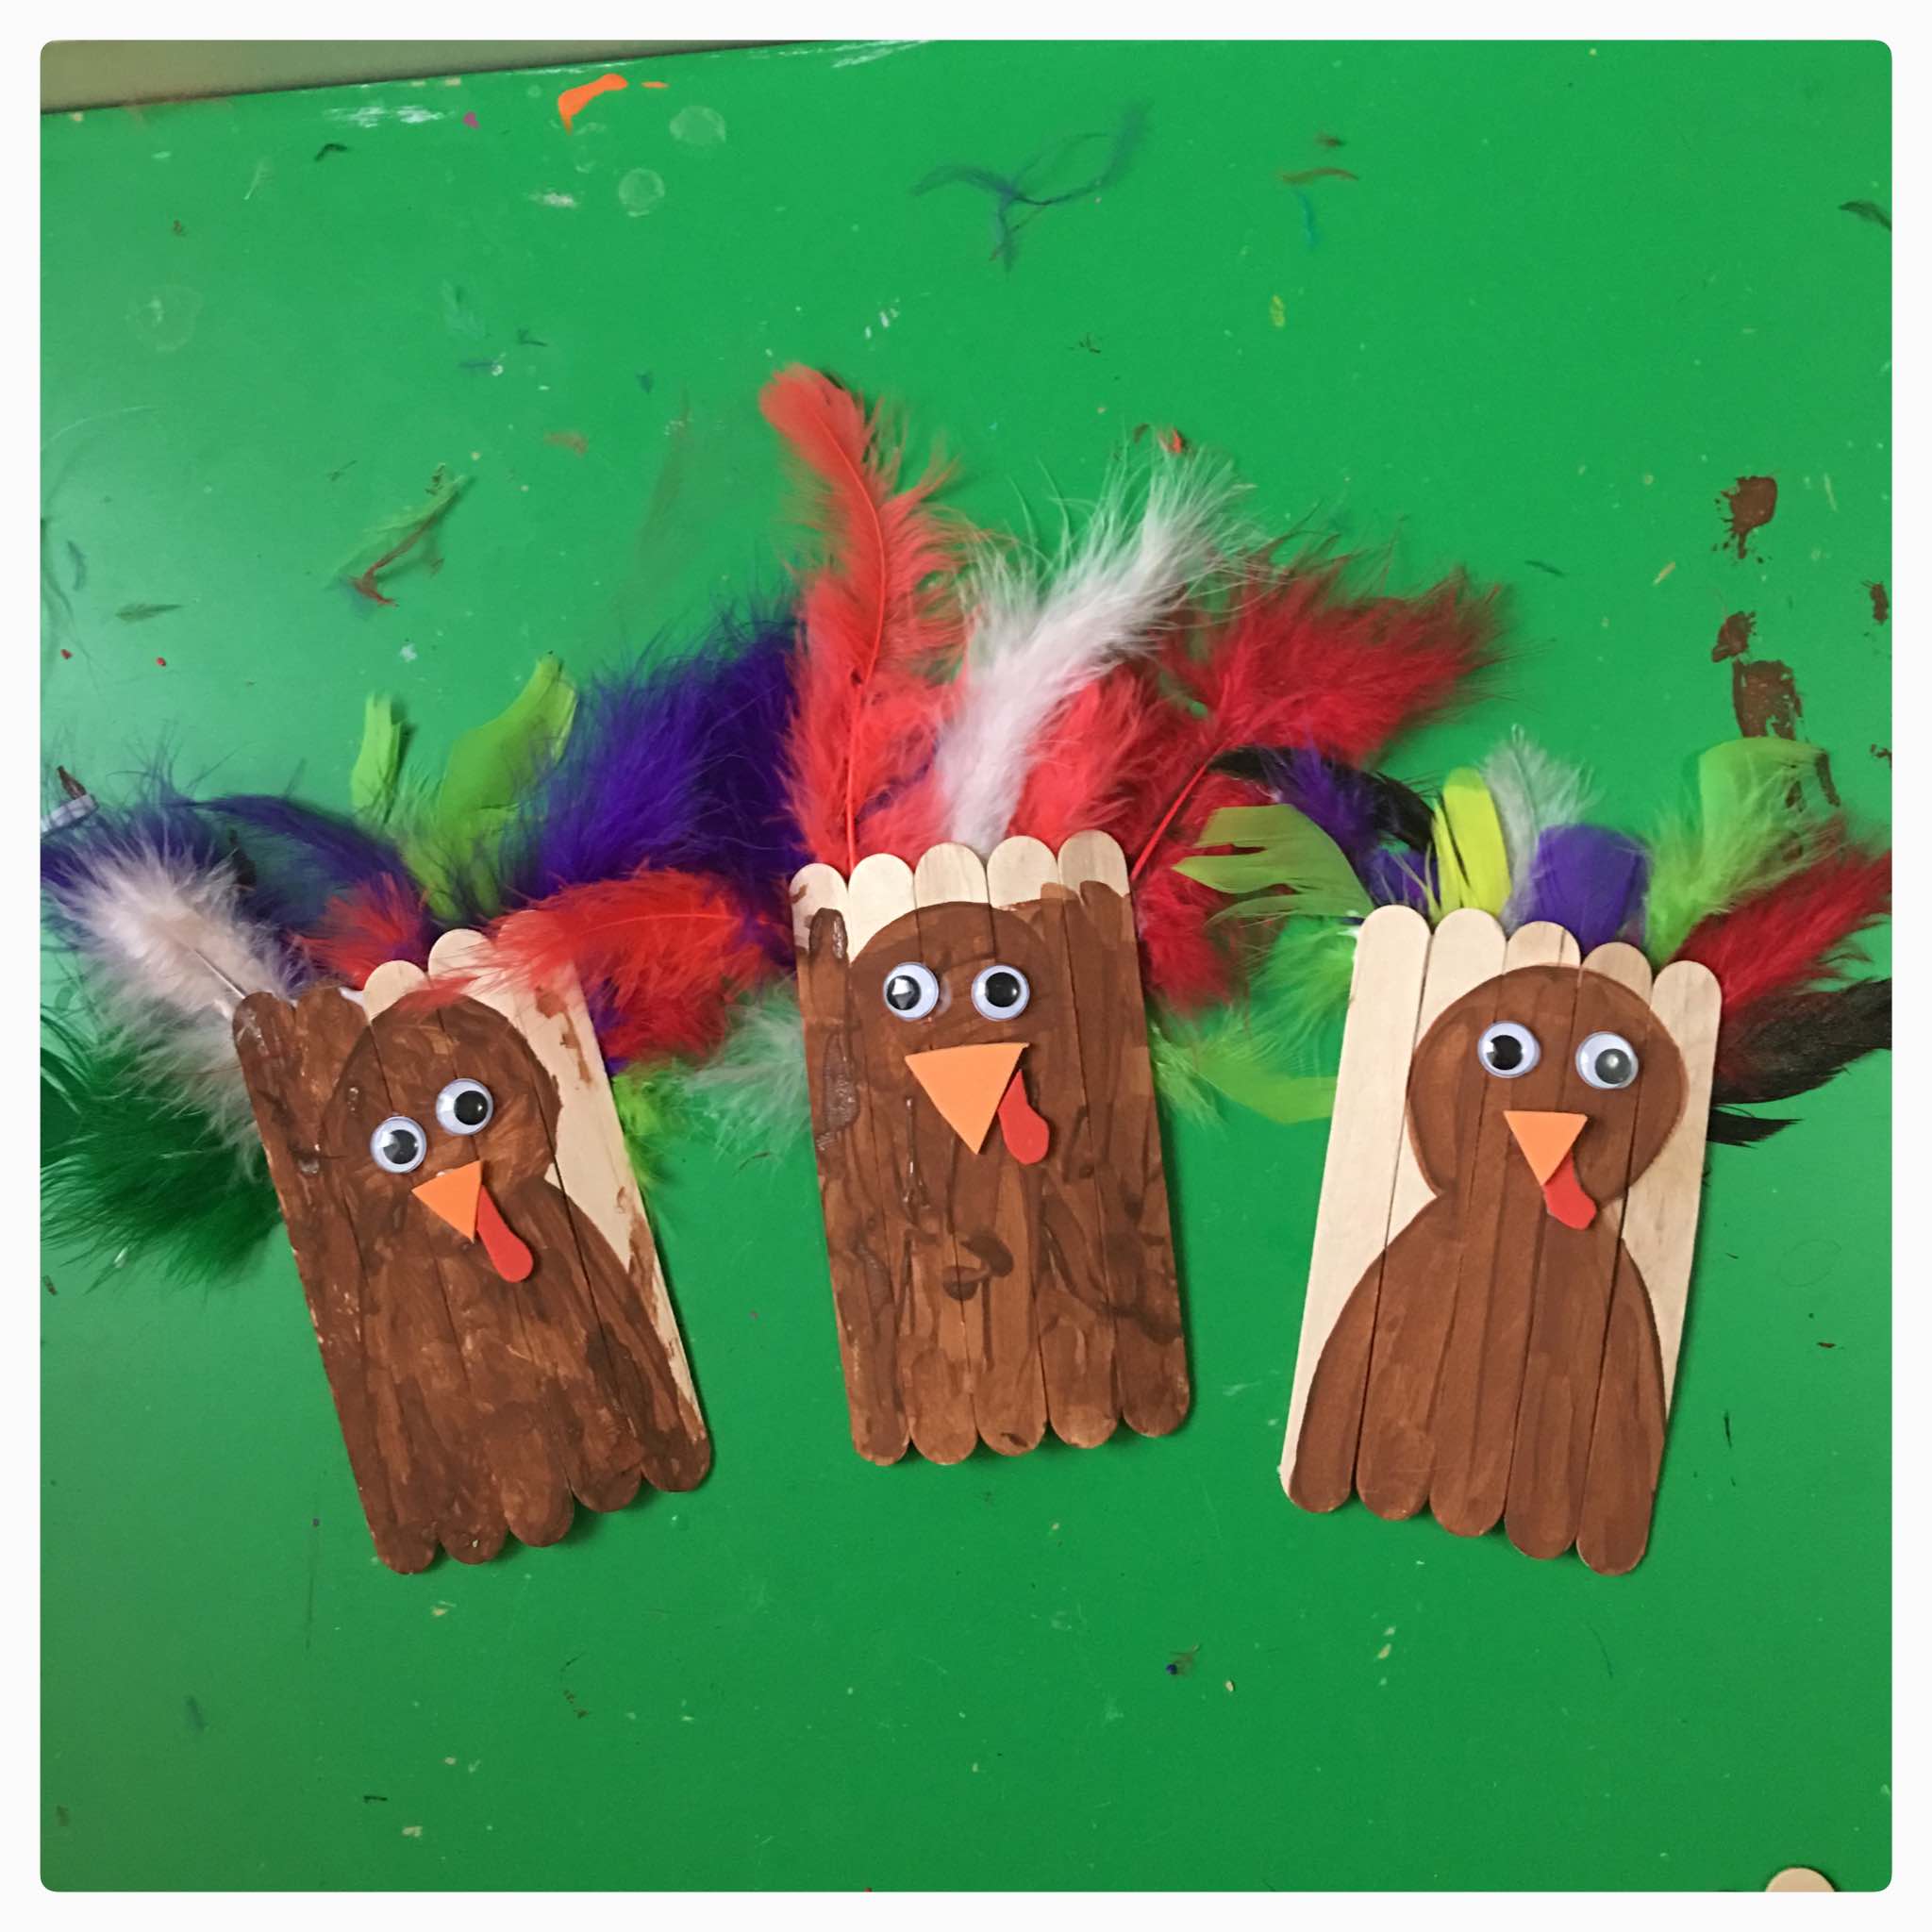 Fun and simple craft project for Thanksgiving using jumbo craft sticks (popsicle sticks).